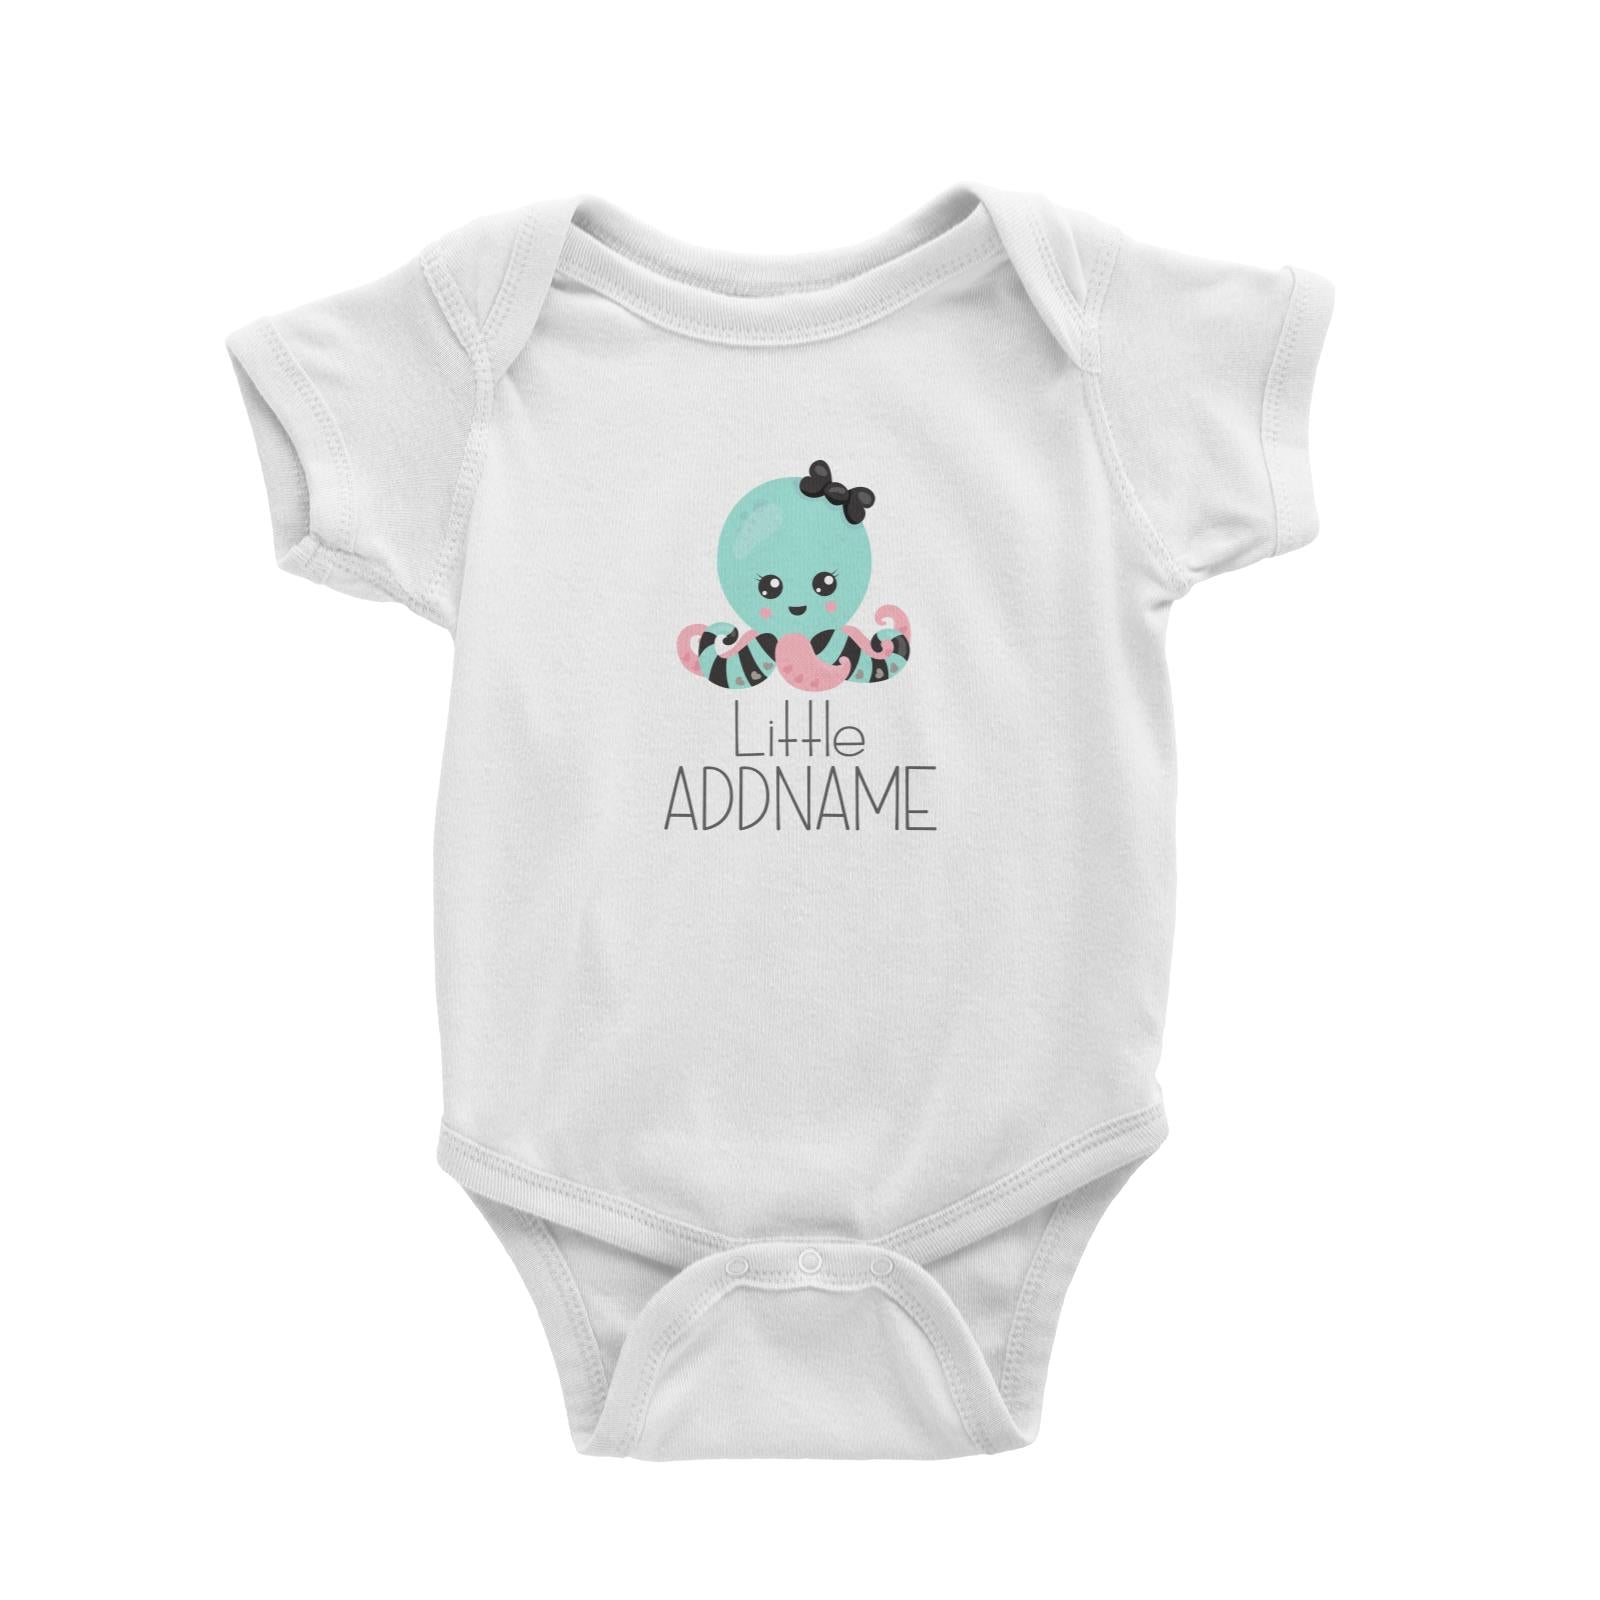 Nursery Animals Little Octopus with Ribbon Addname White Baby Romper